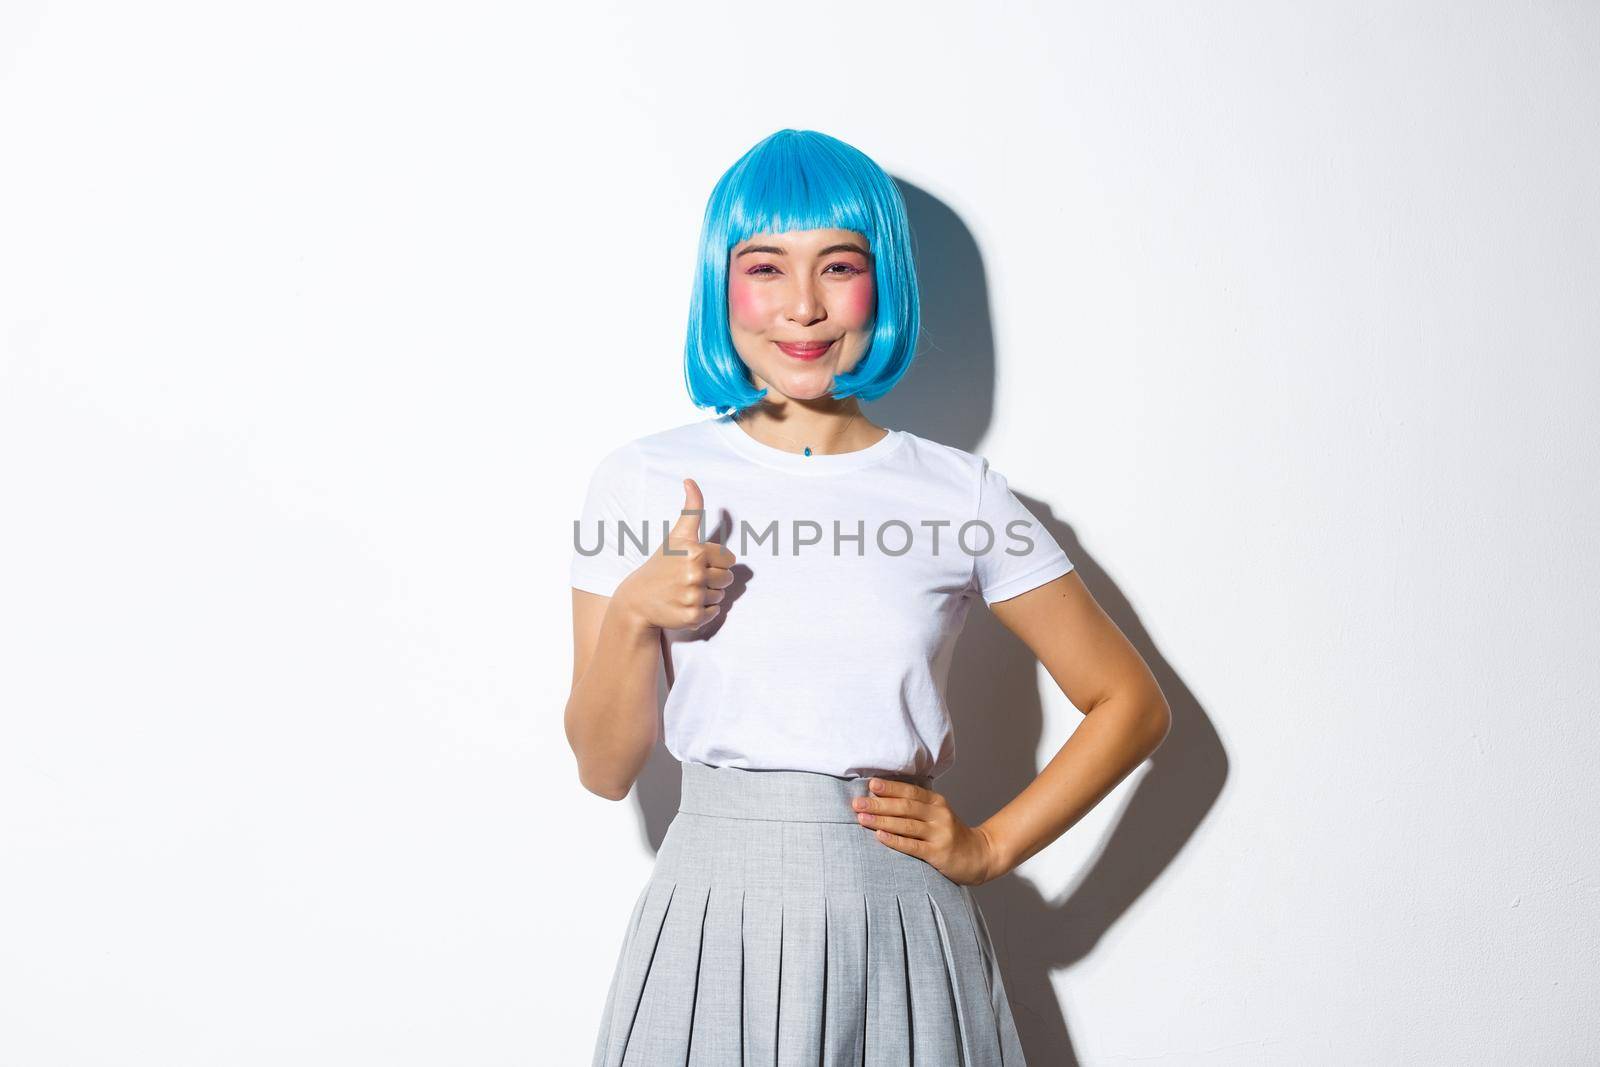 Portrait of cute asian girl in blue wig looking satisfied, smiling and showing thumbs-up in approval, dressed for halloween celebration, standing over white background.